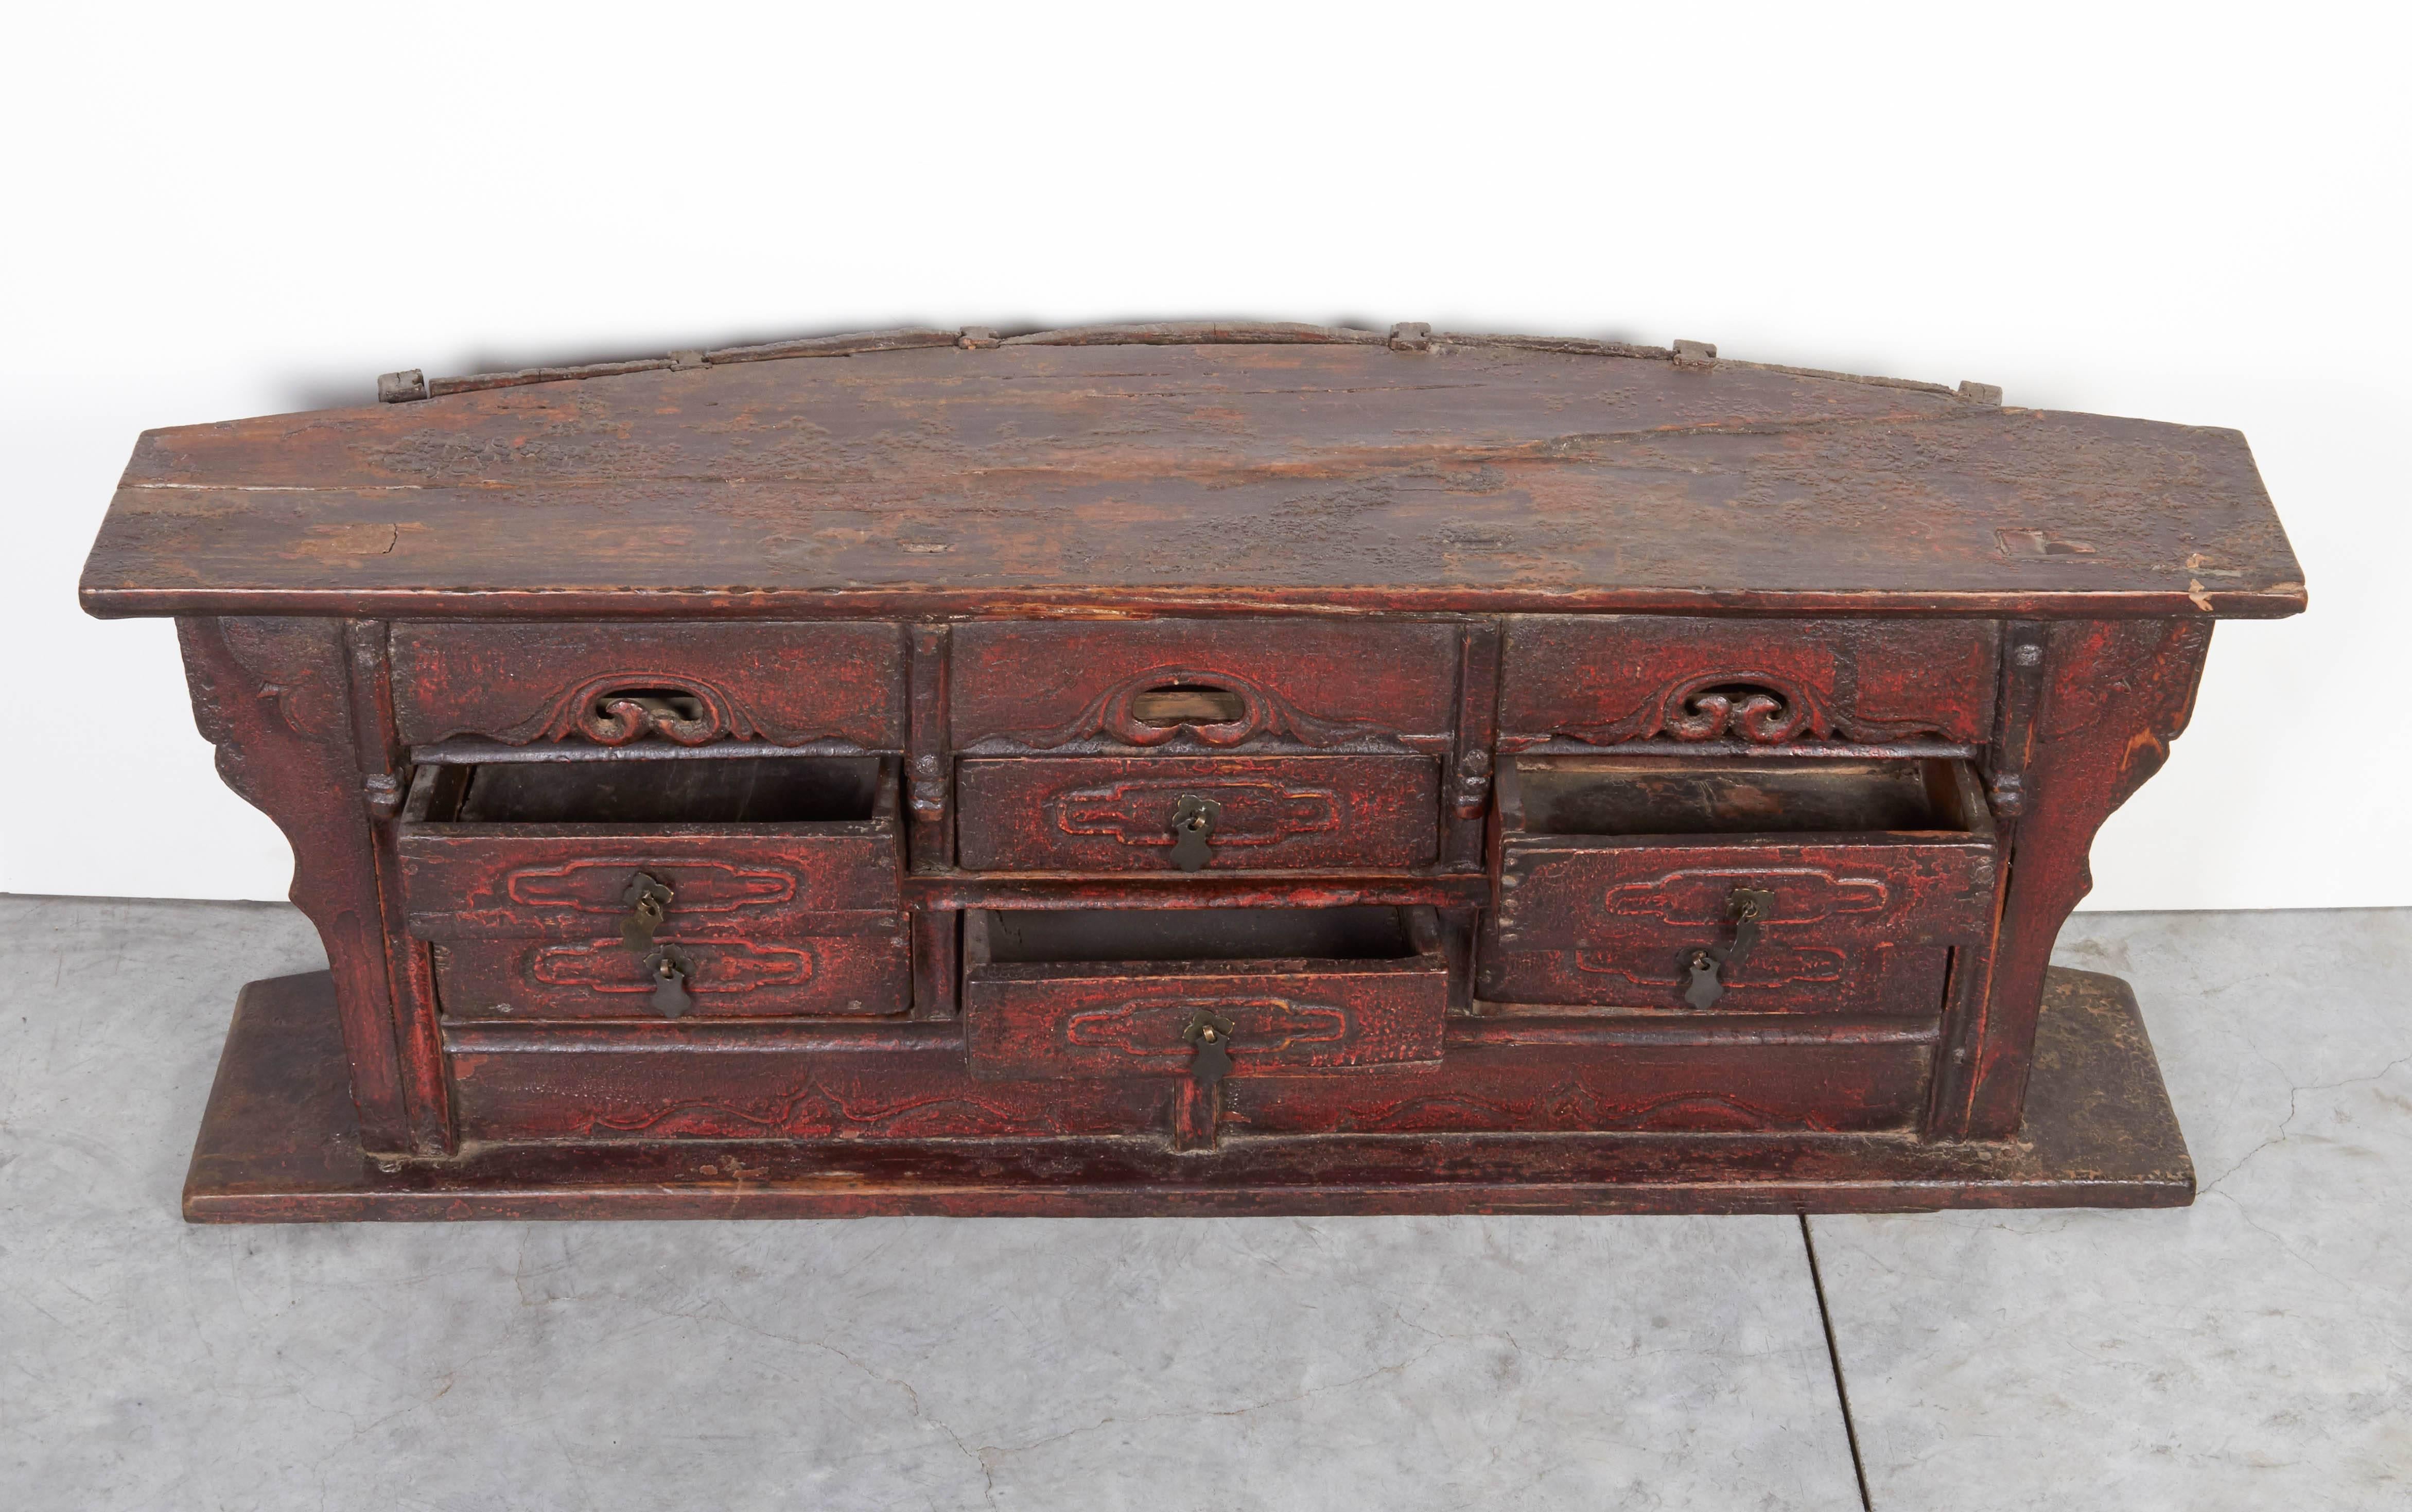 An unusually shaped small antique Chinese apothecary cabinet with original hardware and warm patina. This piece is not only beautiful, but has many practical uses, including as a jewelry box or storage for small collectibles. From Shanxi Province.